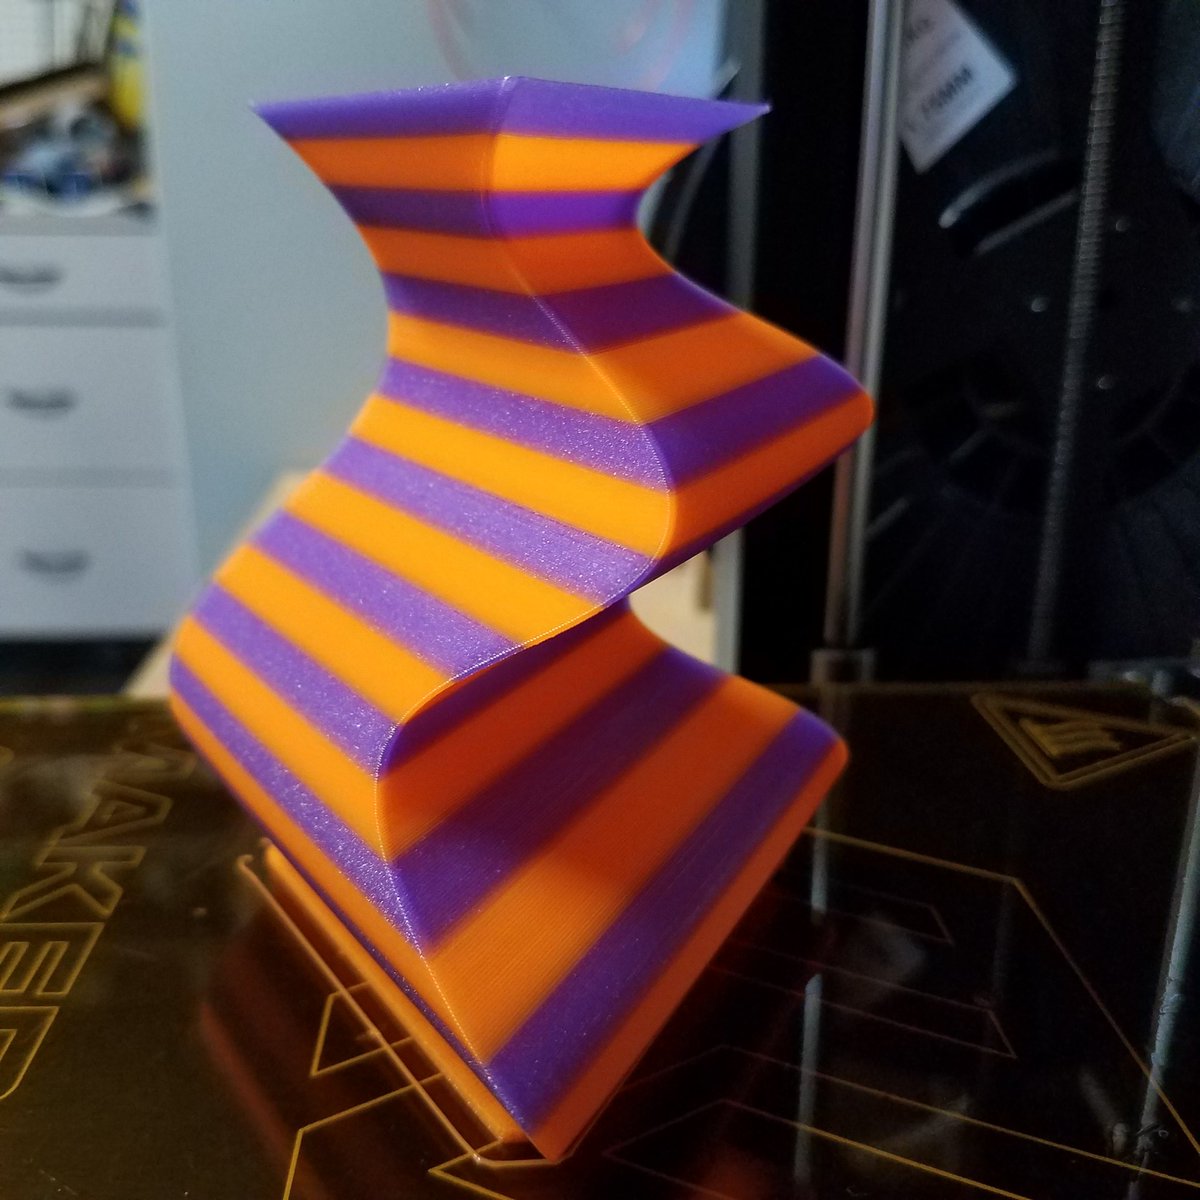  Sweet! @MosaicMfg  @PalettePrinted with  @PrintedSolid Mix Tape #3 (a.k.a. in my family as Orange Soda) &  @AtomicFilament Indigo Golden Sparkle. Model coming soon to  @Cults3D.